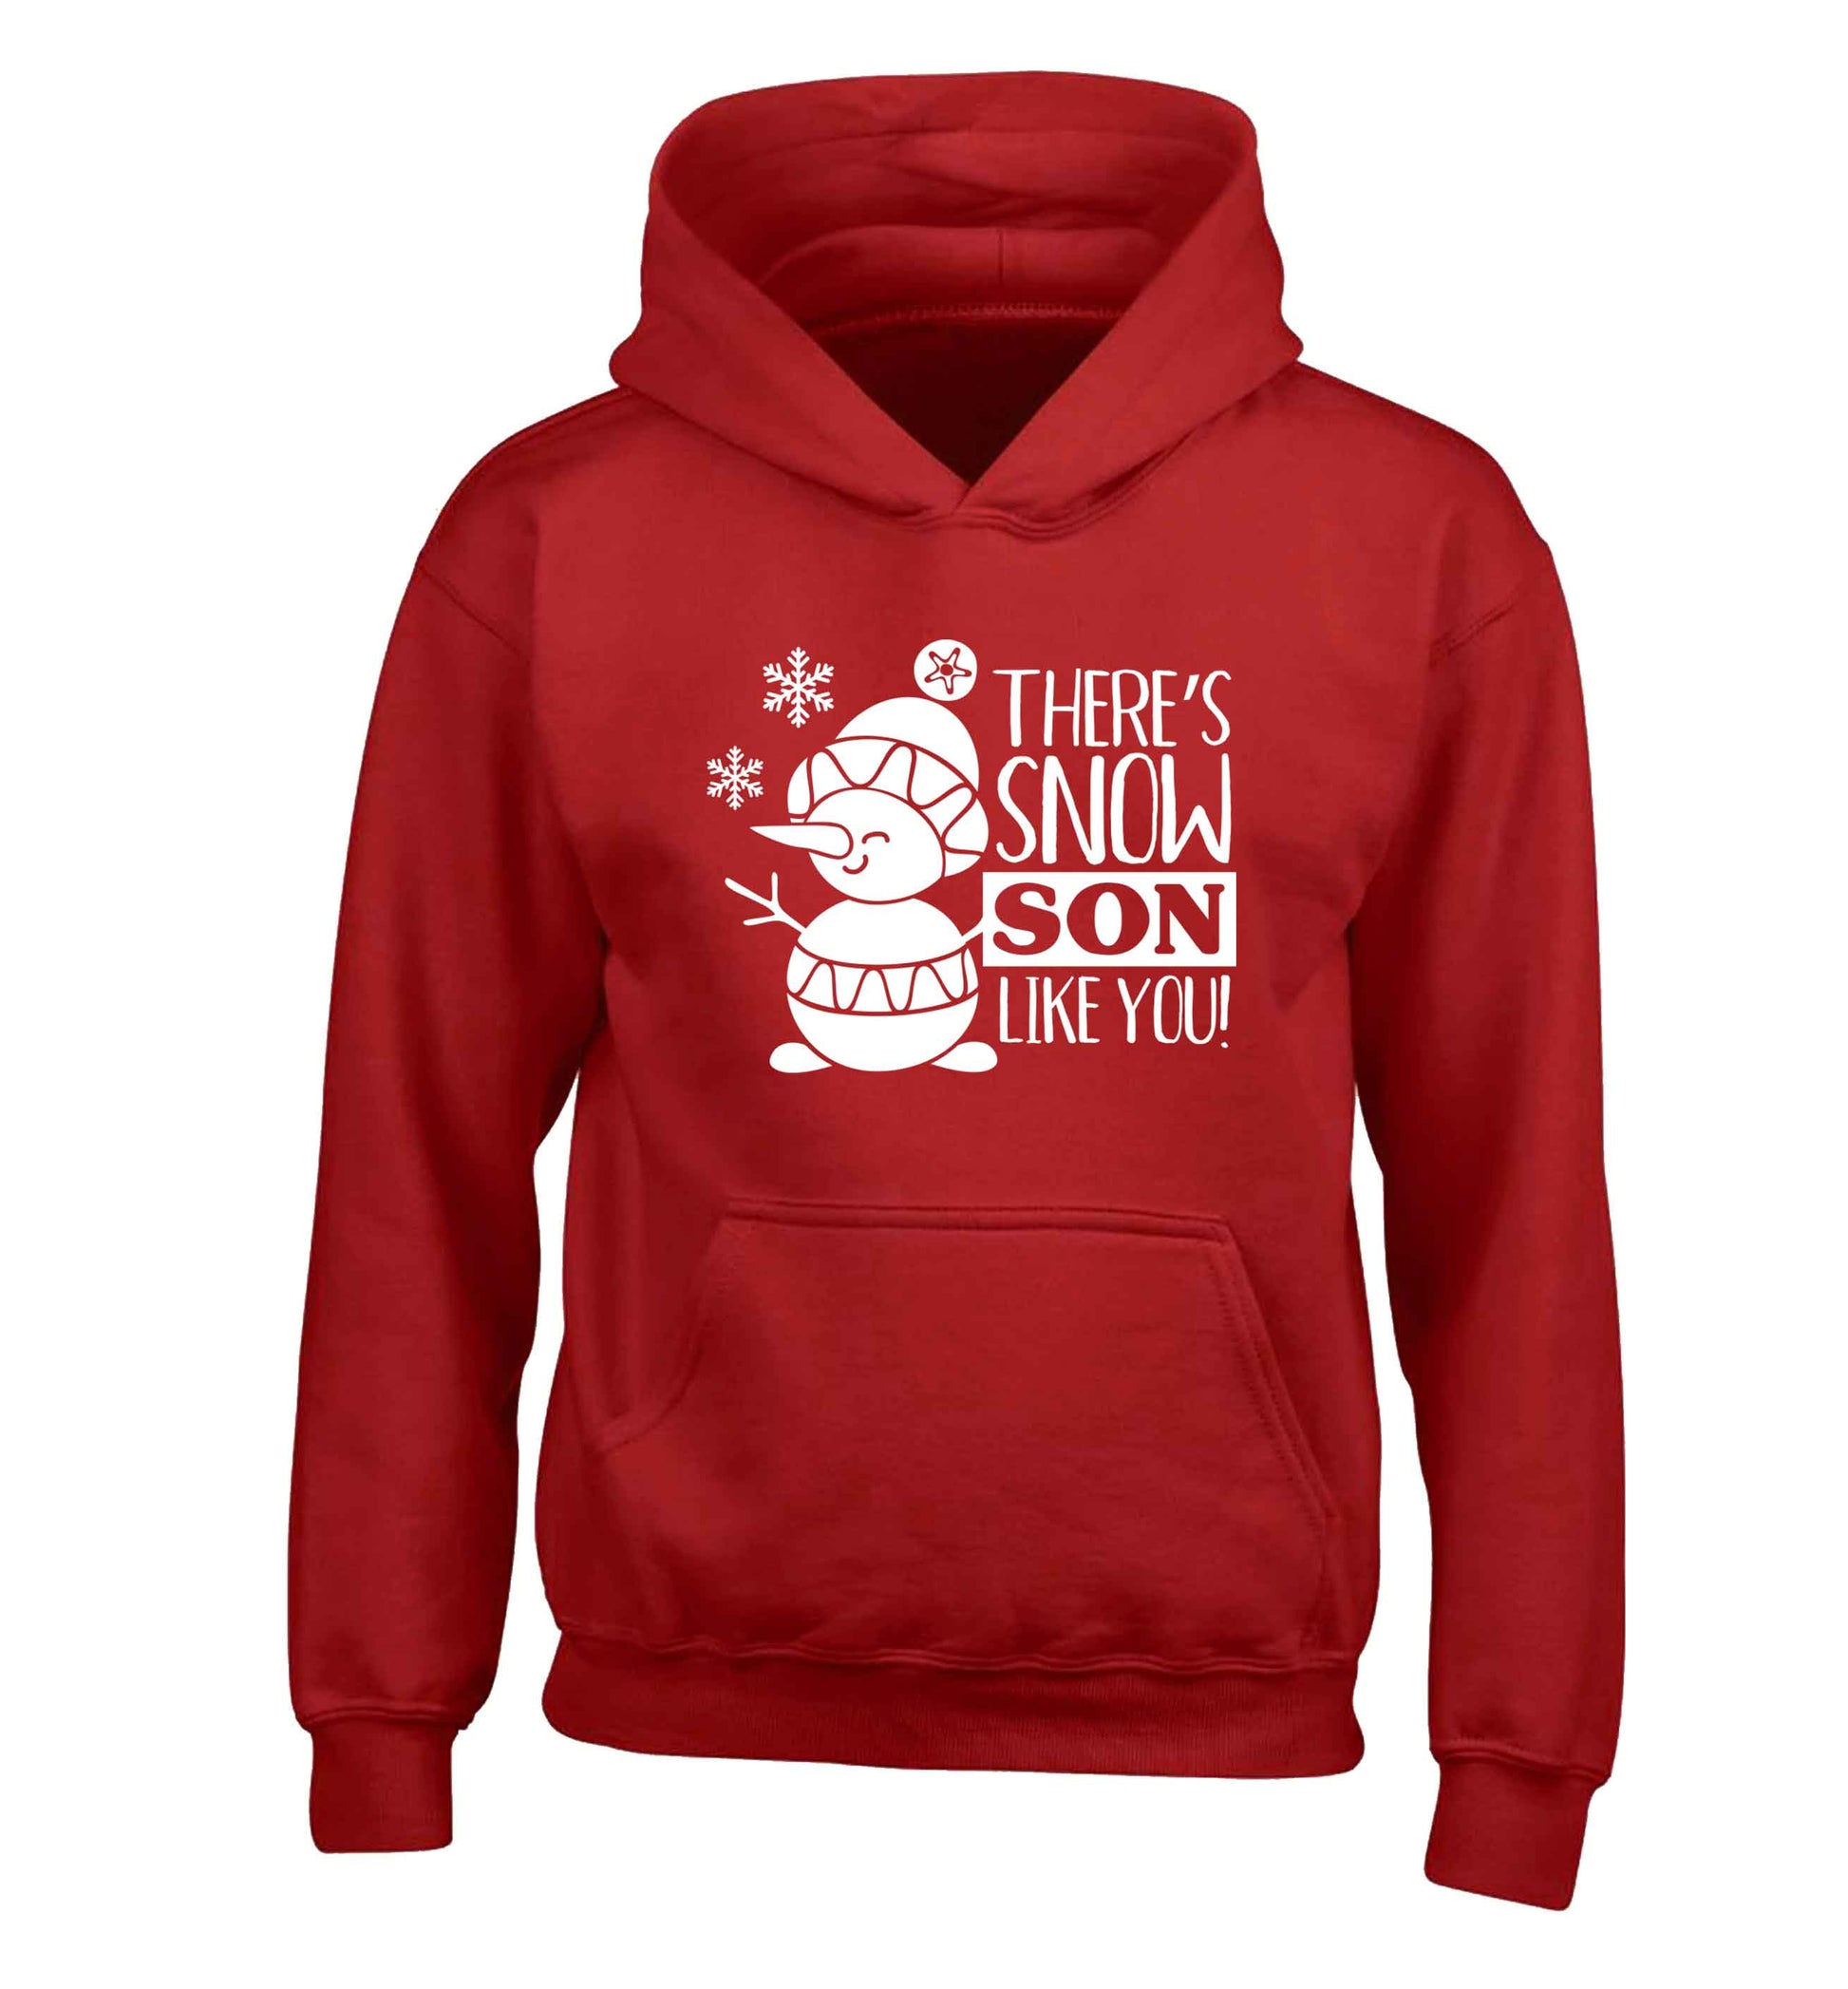 There's snow son like you children's red hoodie 12-13 Years